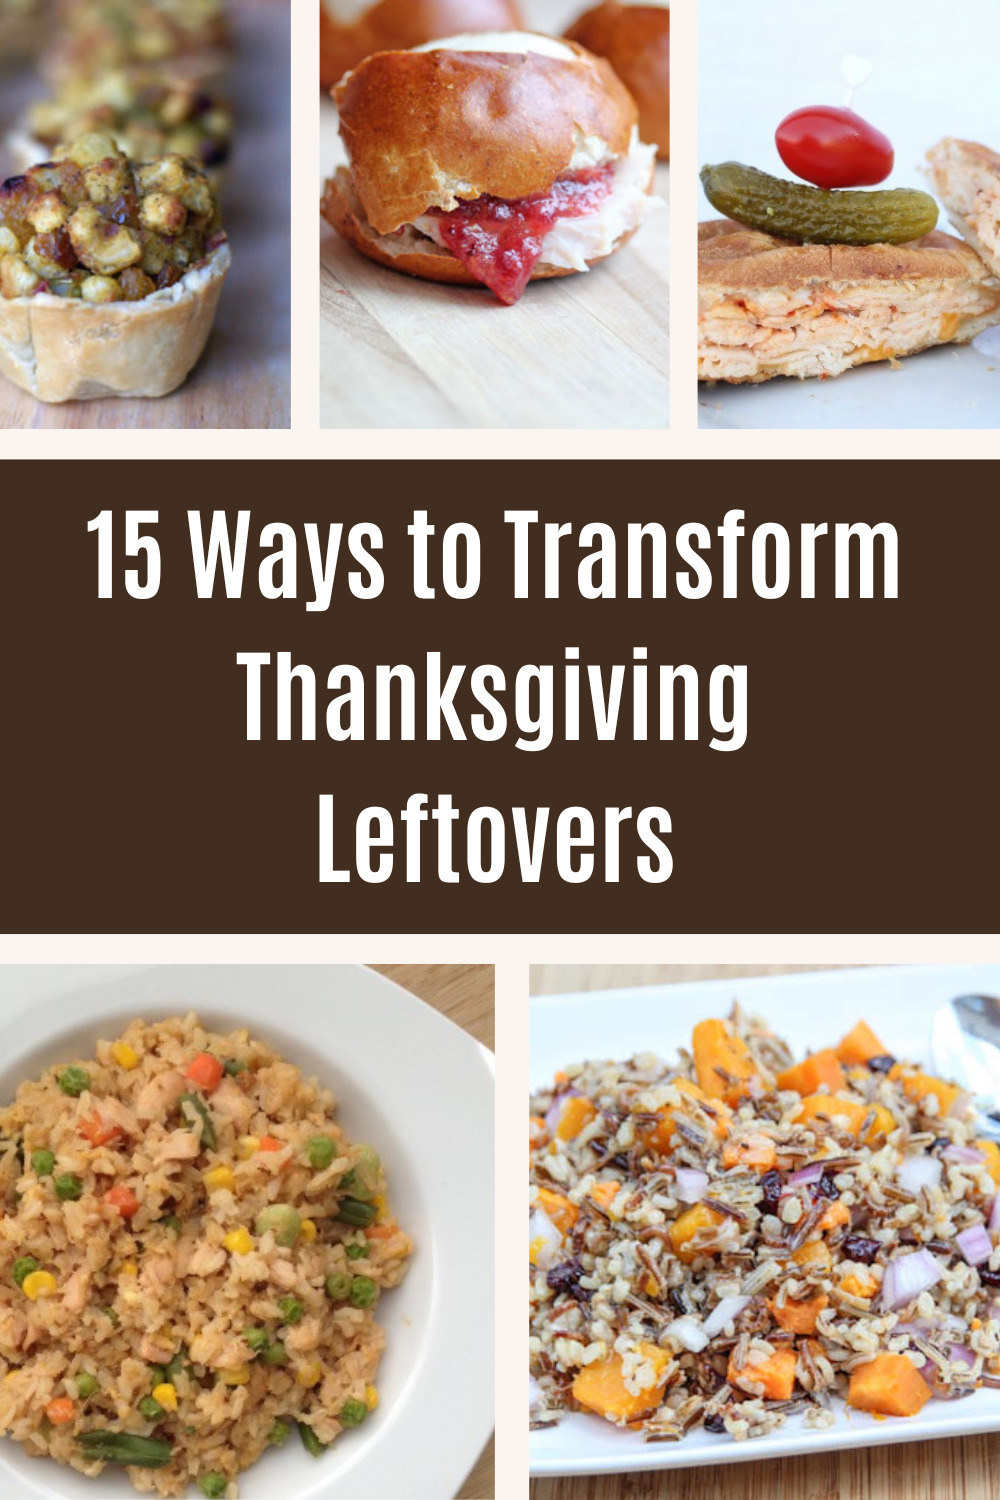 15 ways to transform Thanksgiving leftovers